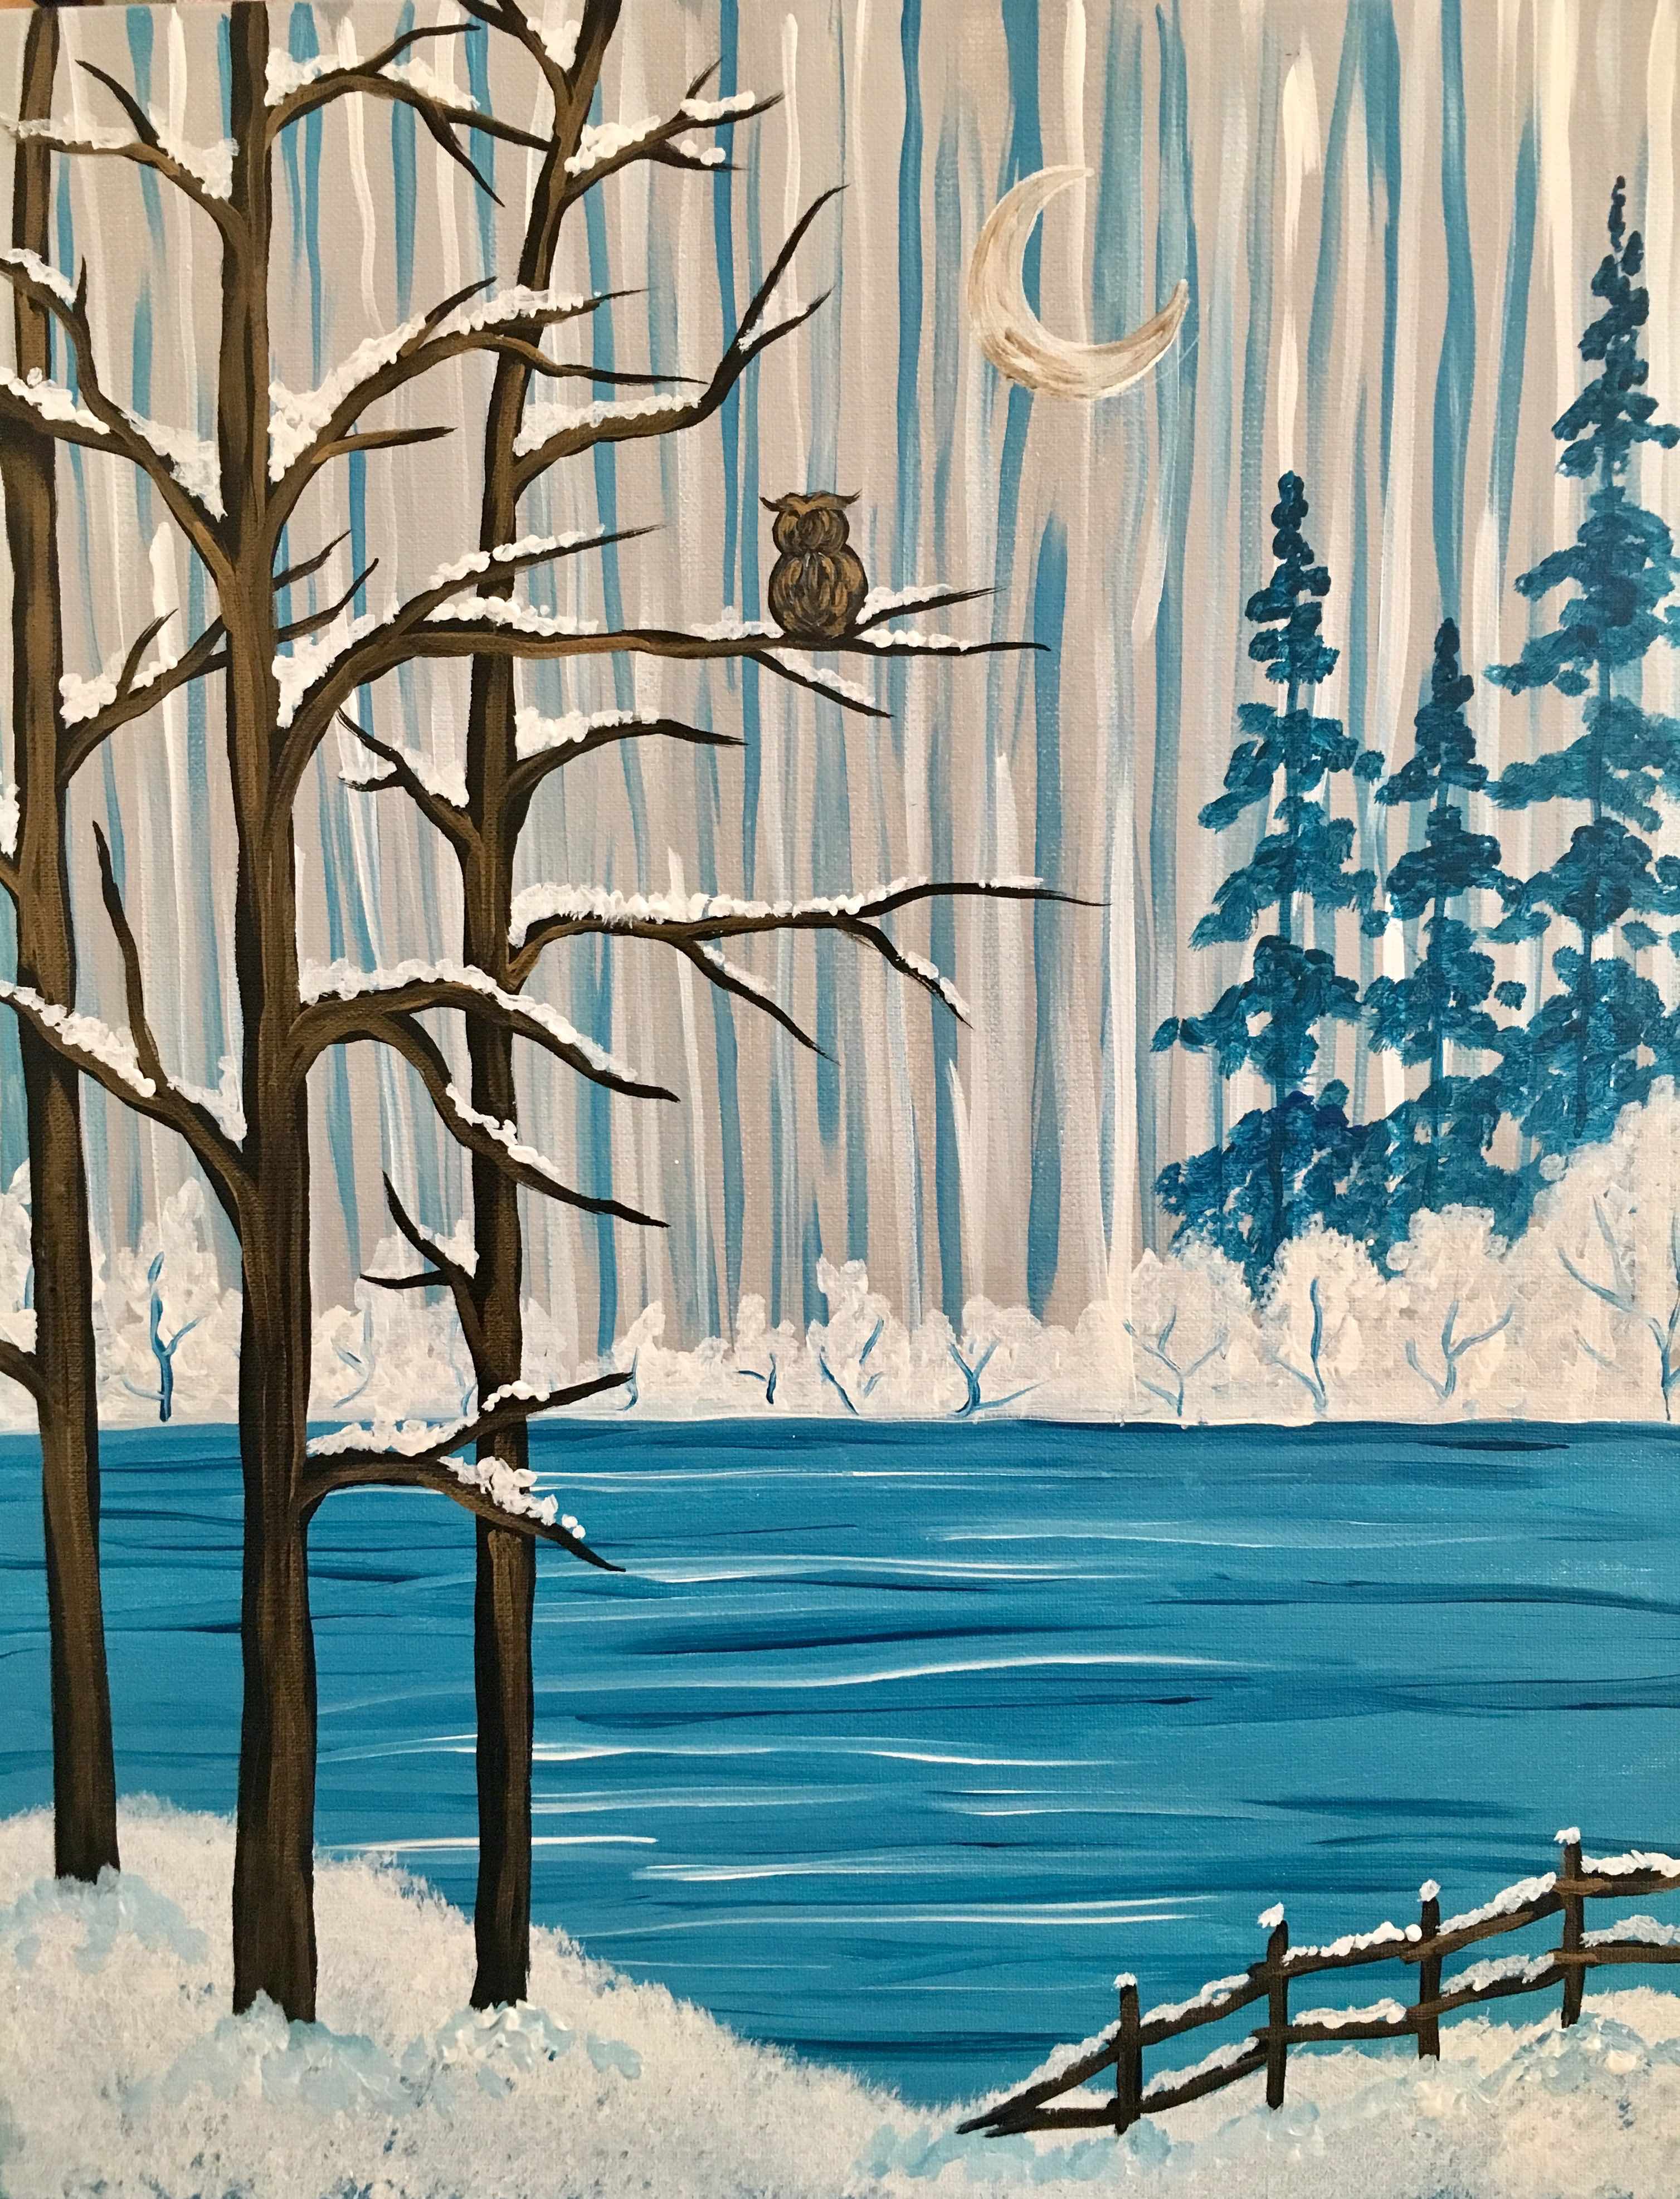 Winter Serenity - Pinot's Palette Painting